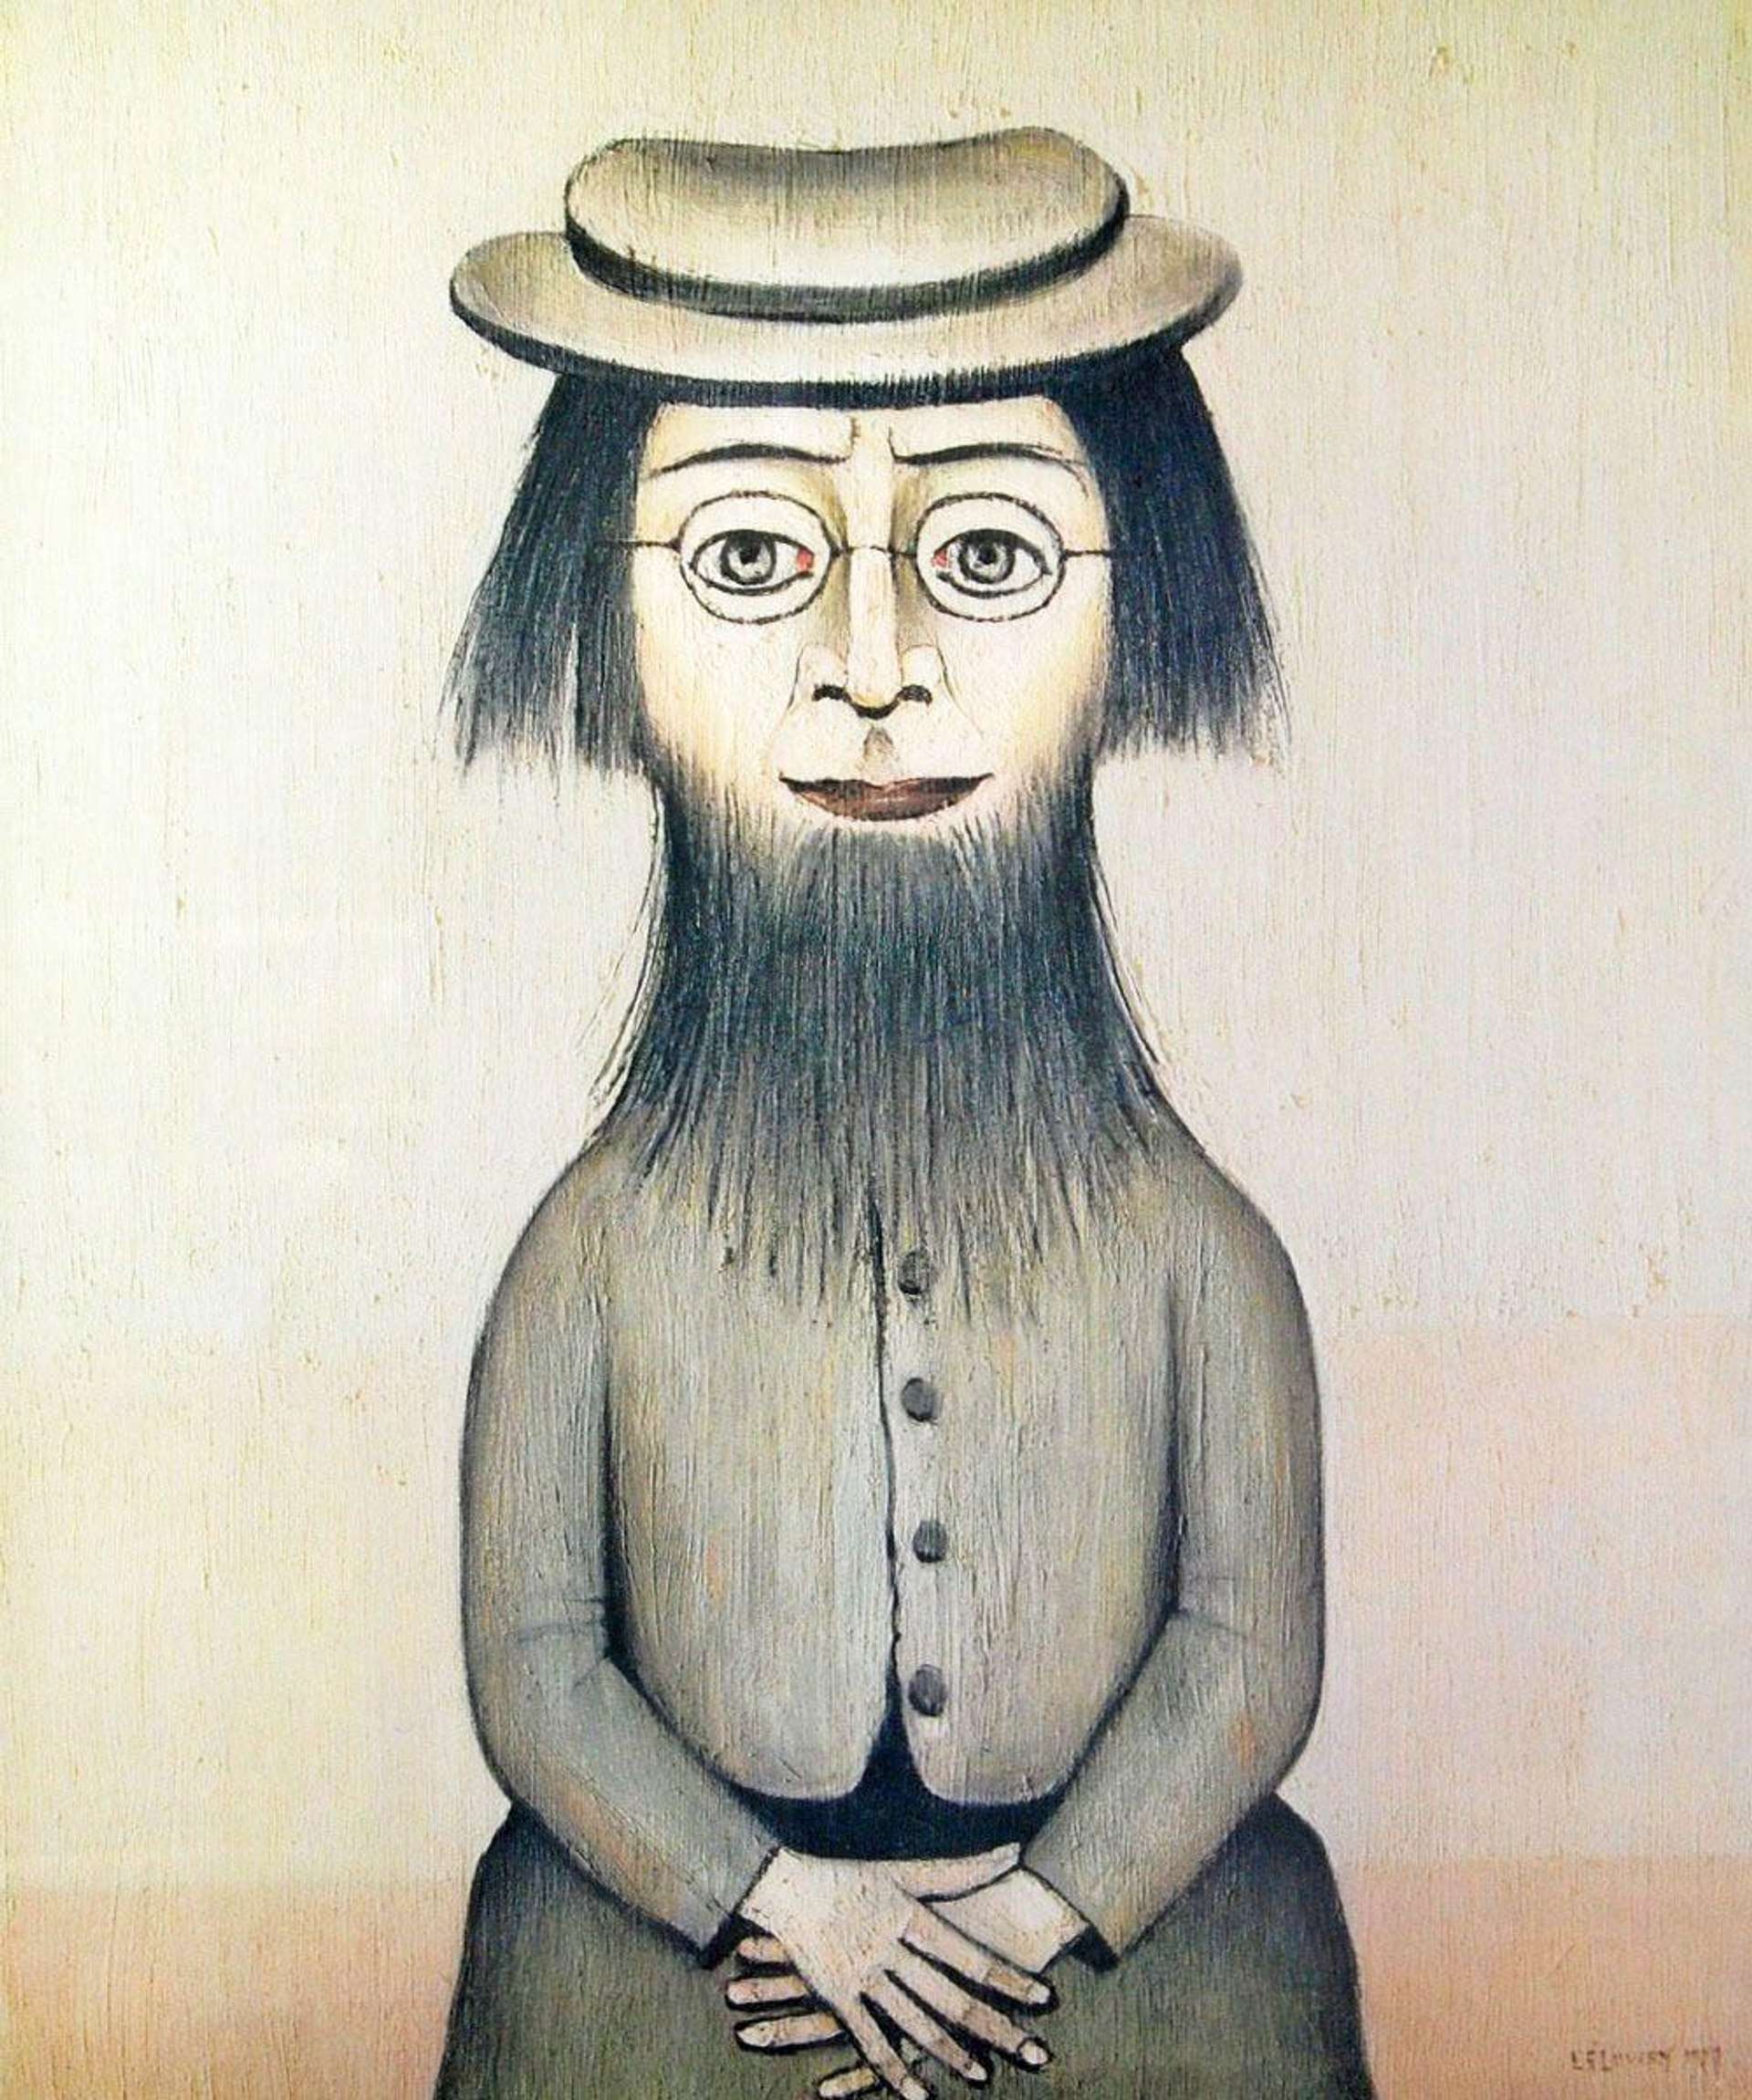 A portrait of a Woman With Beard by L.S. Lowry. The woman is shown wearing glasses and a hat, and has her hands crossed over her lap.